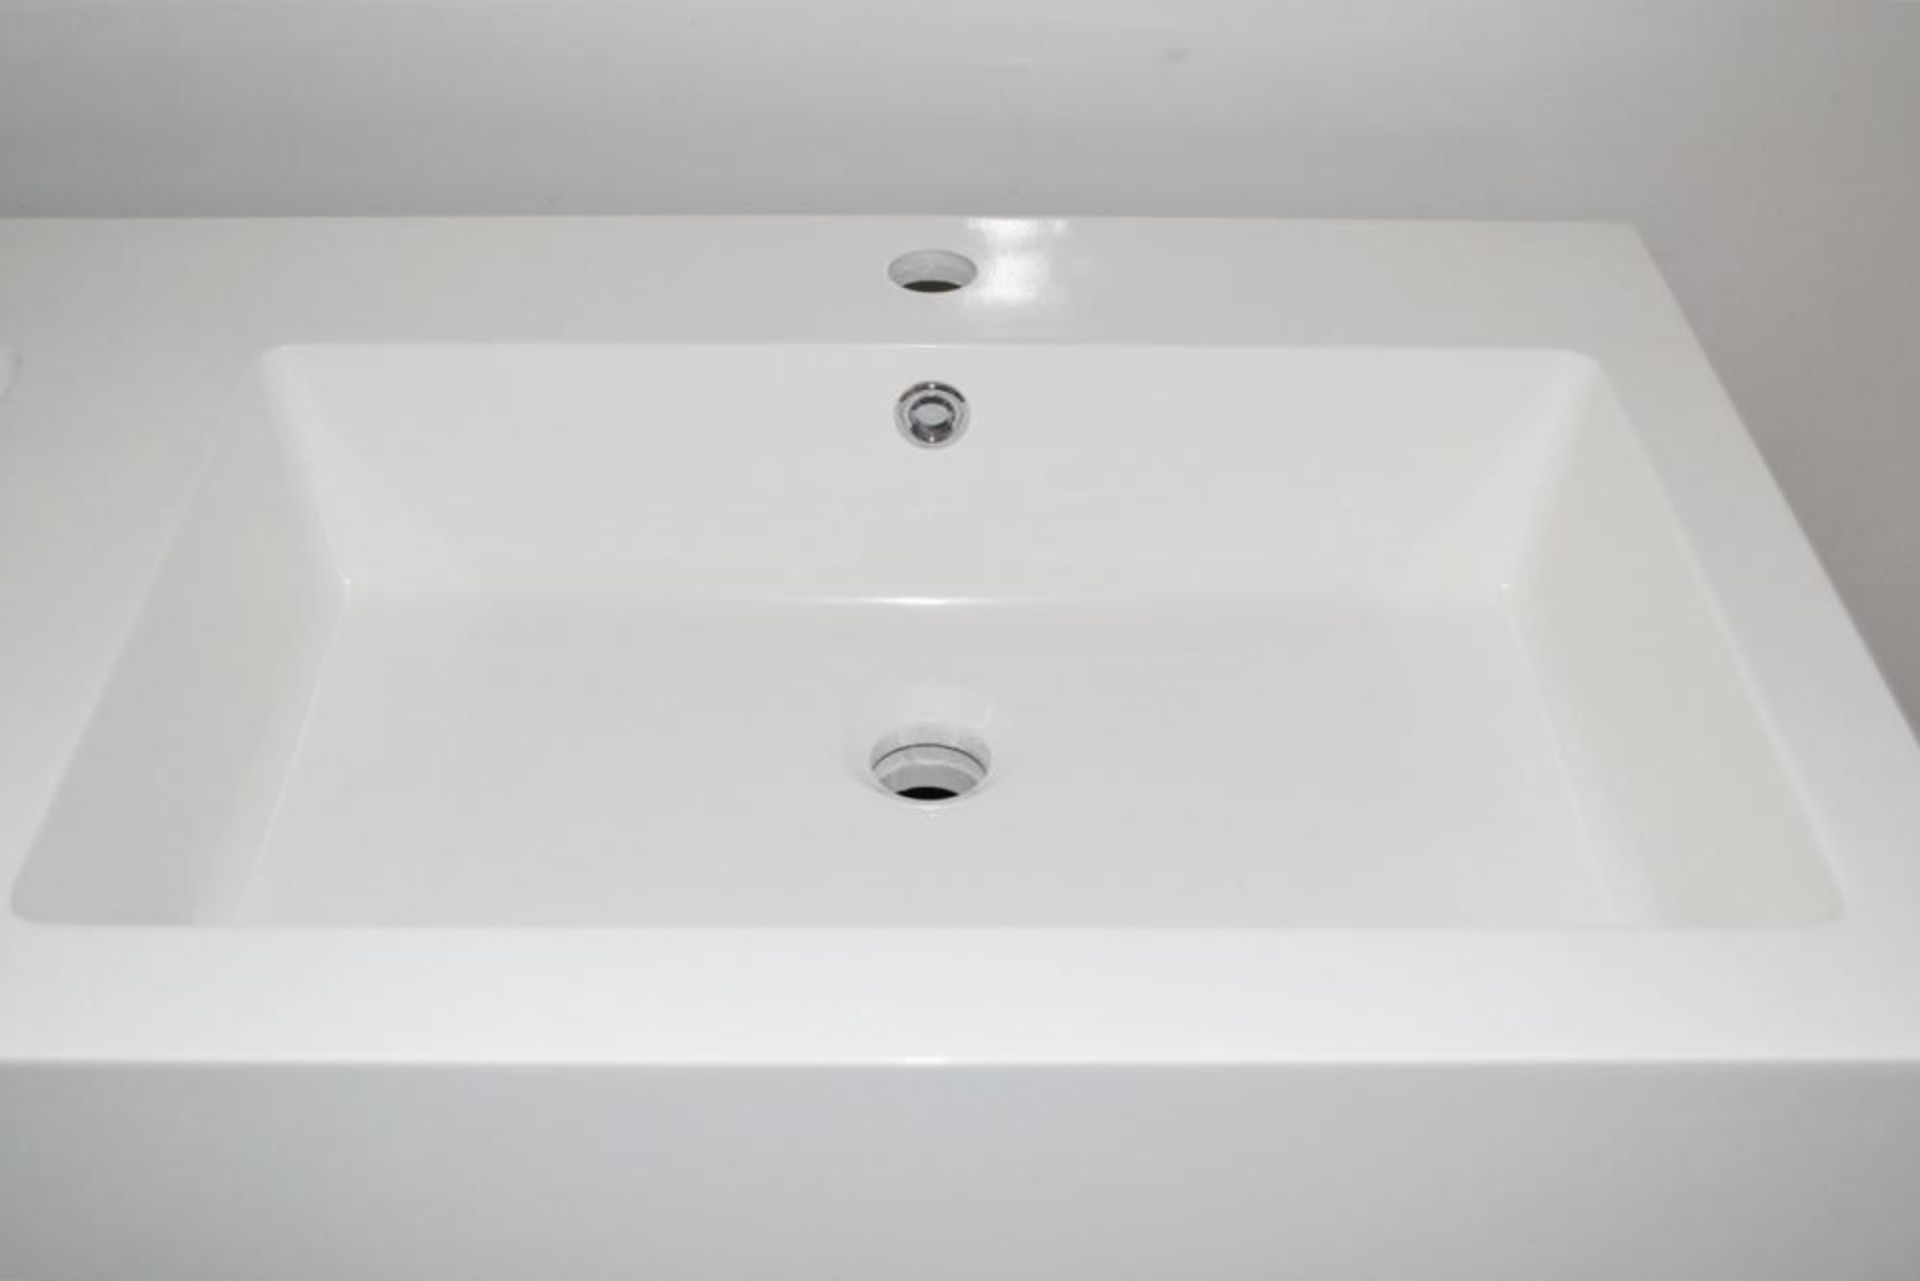 1 x Gloss White 1200mm 4-Door Double Basin Freestanding Bathroom Cabinet - New & Boxed Stock - CL307 - Image 3 of 6